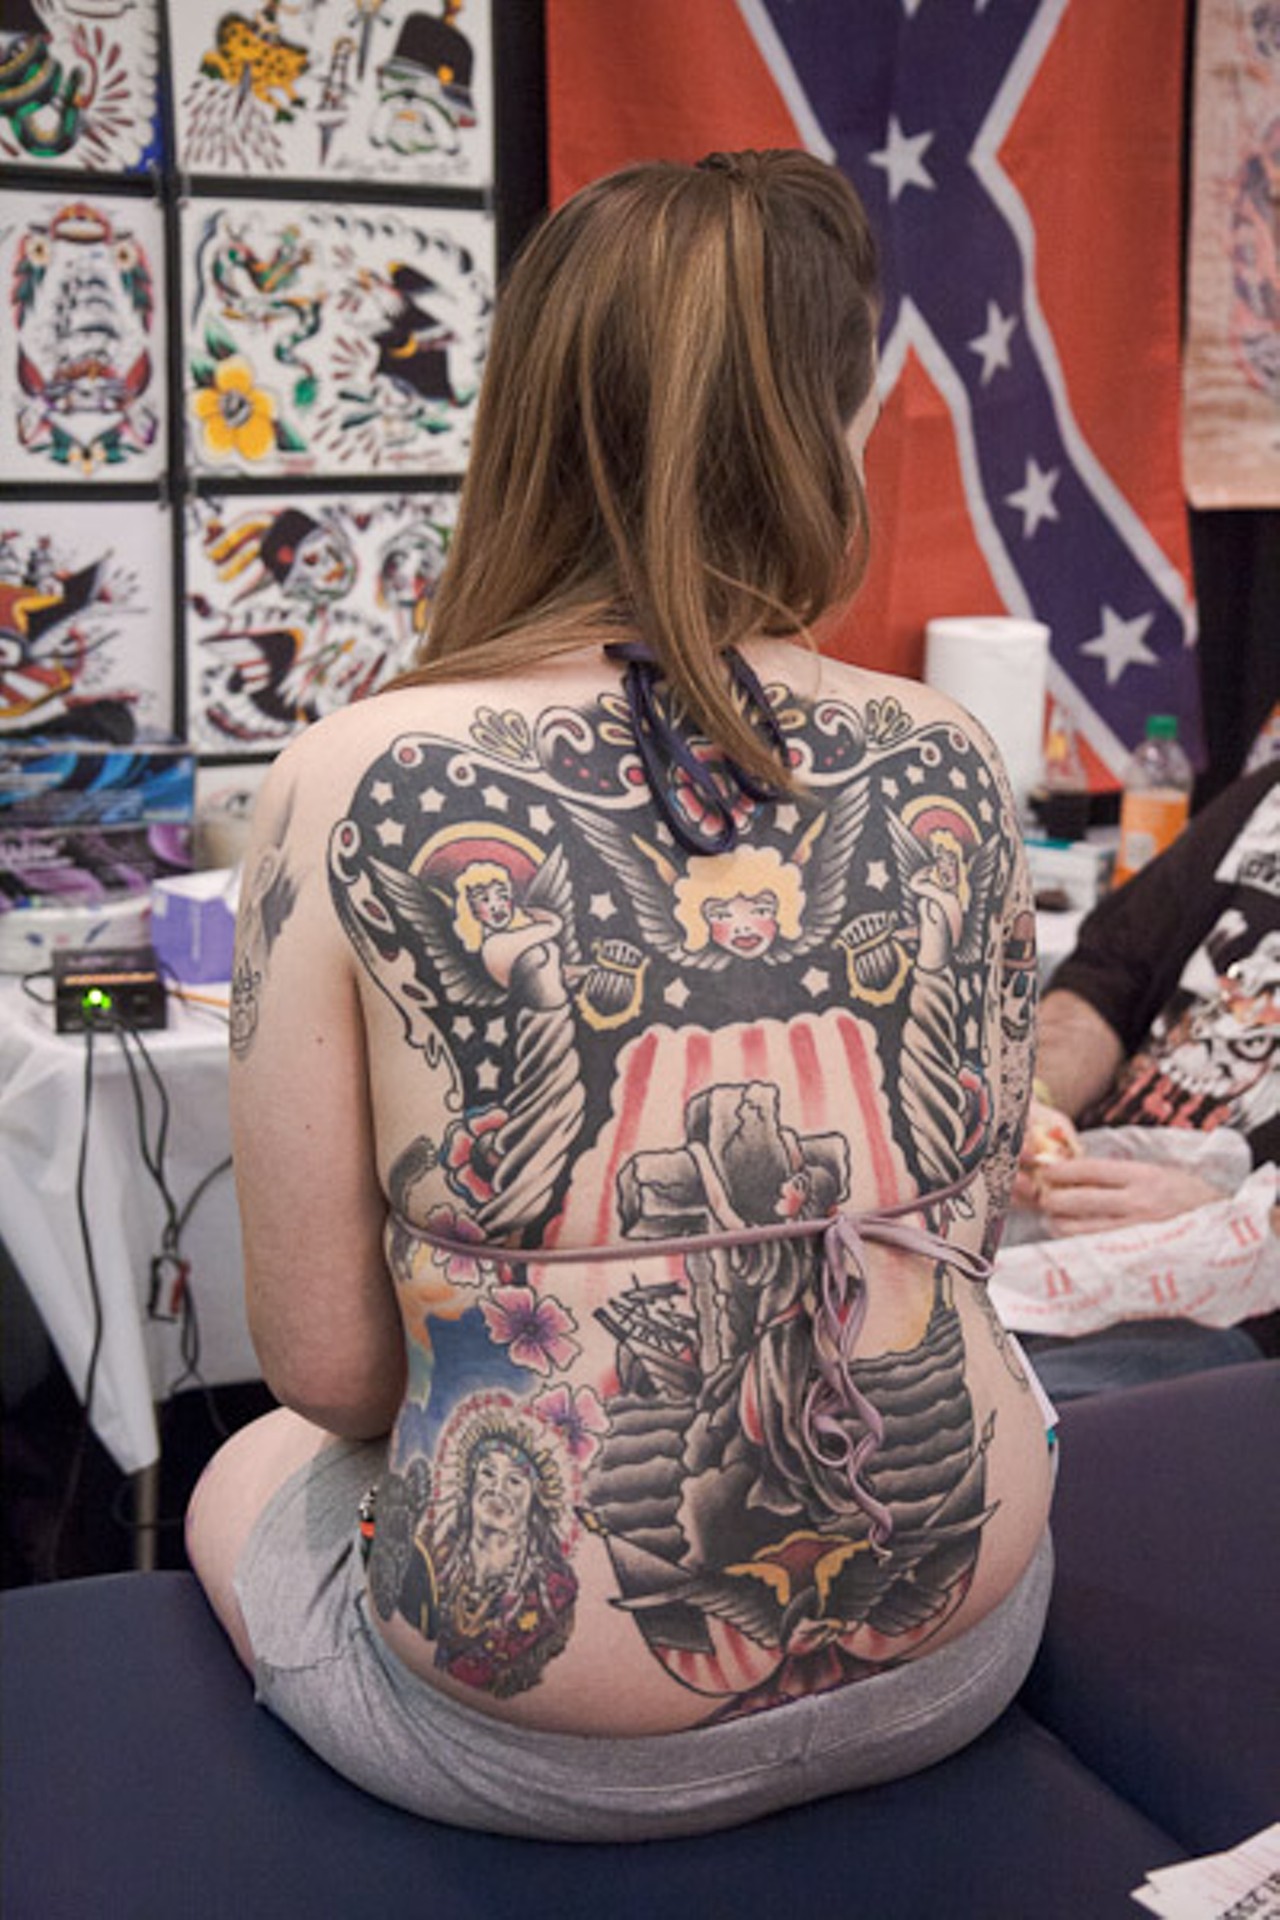 There were many examples of the "old school" tattoo styles on display at the convention.